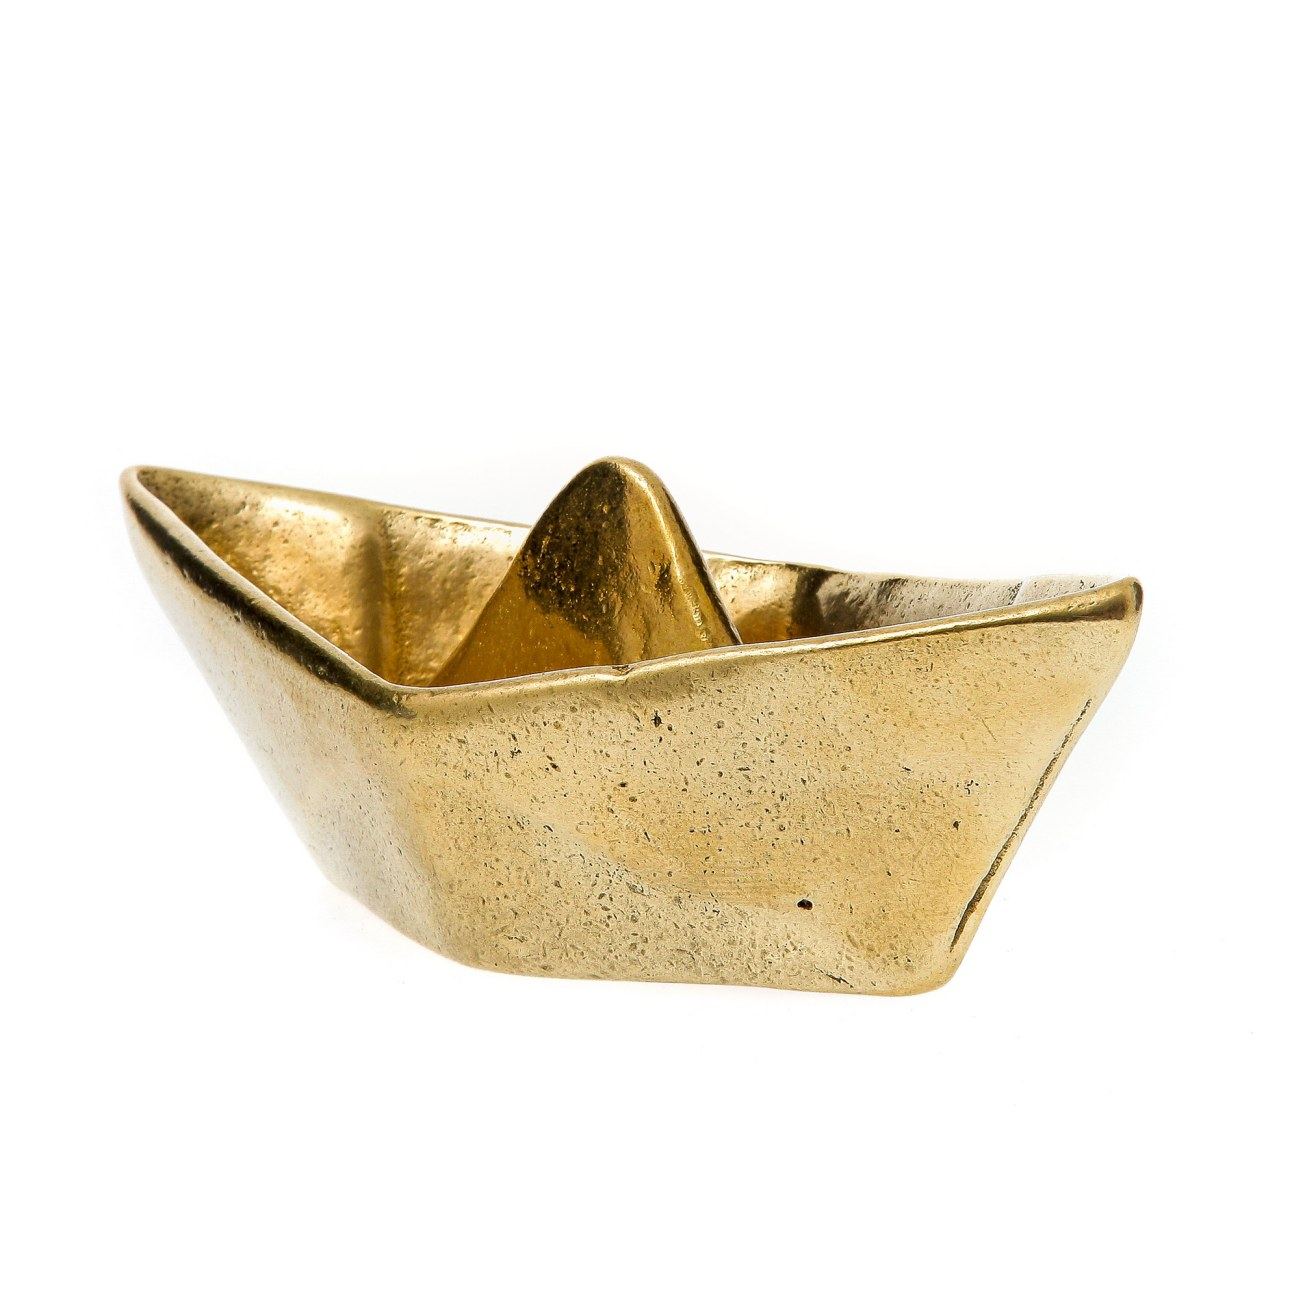 Handmade of Solid Brass Metal Decor 3 Sizes "Paper" Boat Figurines Set of 3 